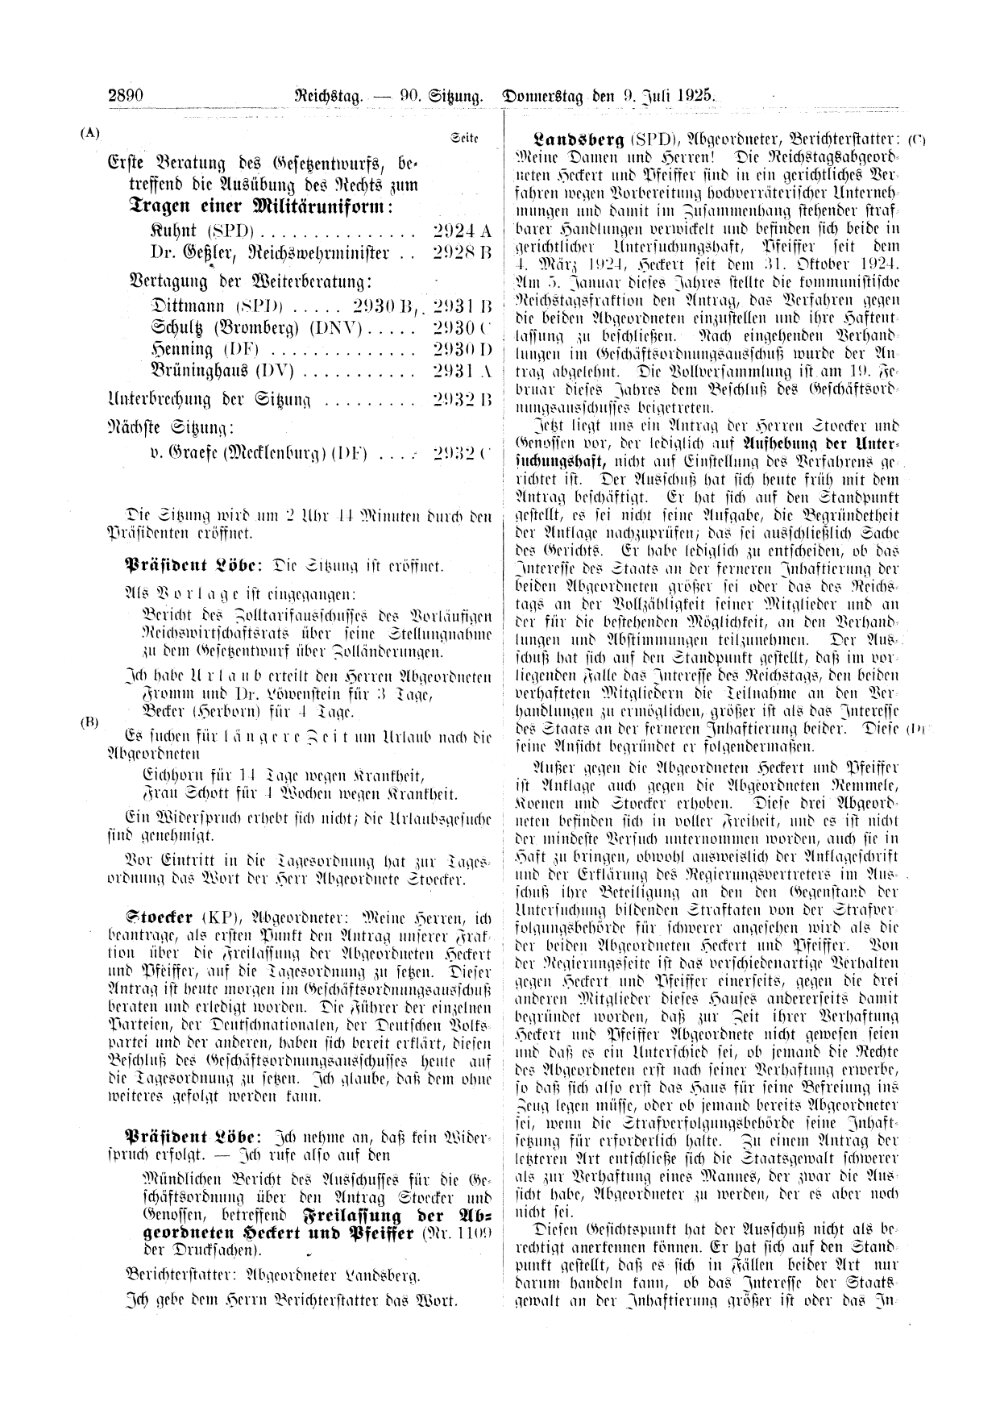 Scan of page 2890